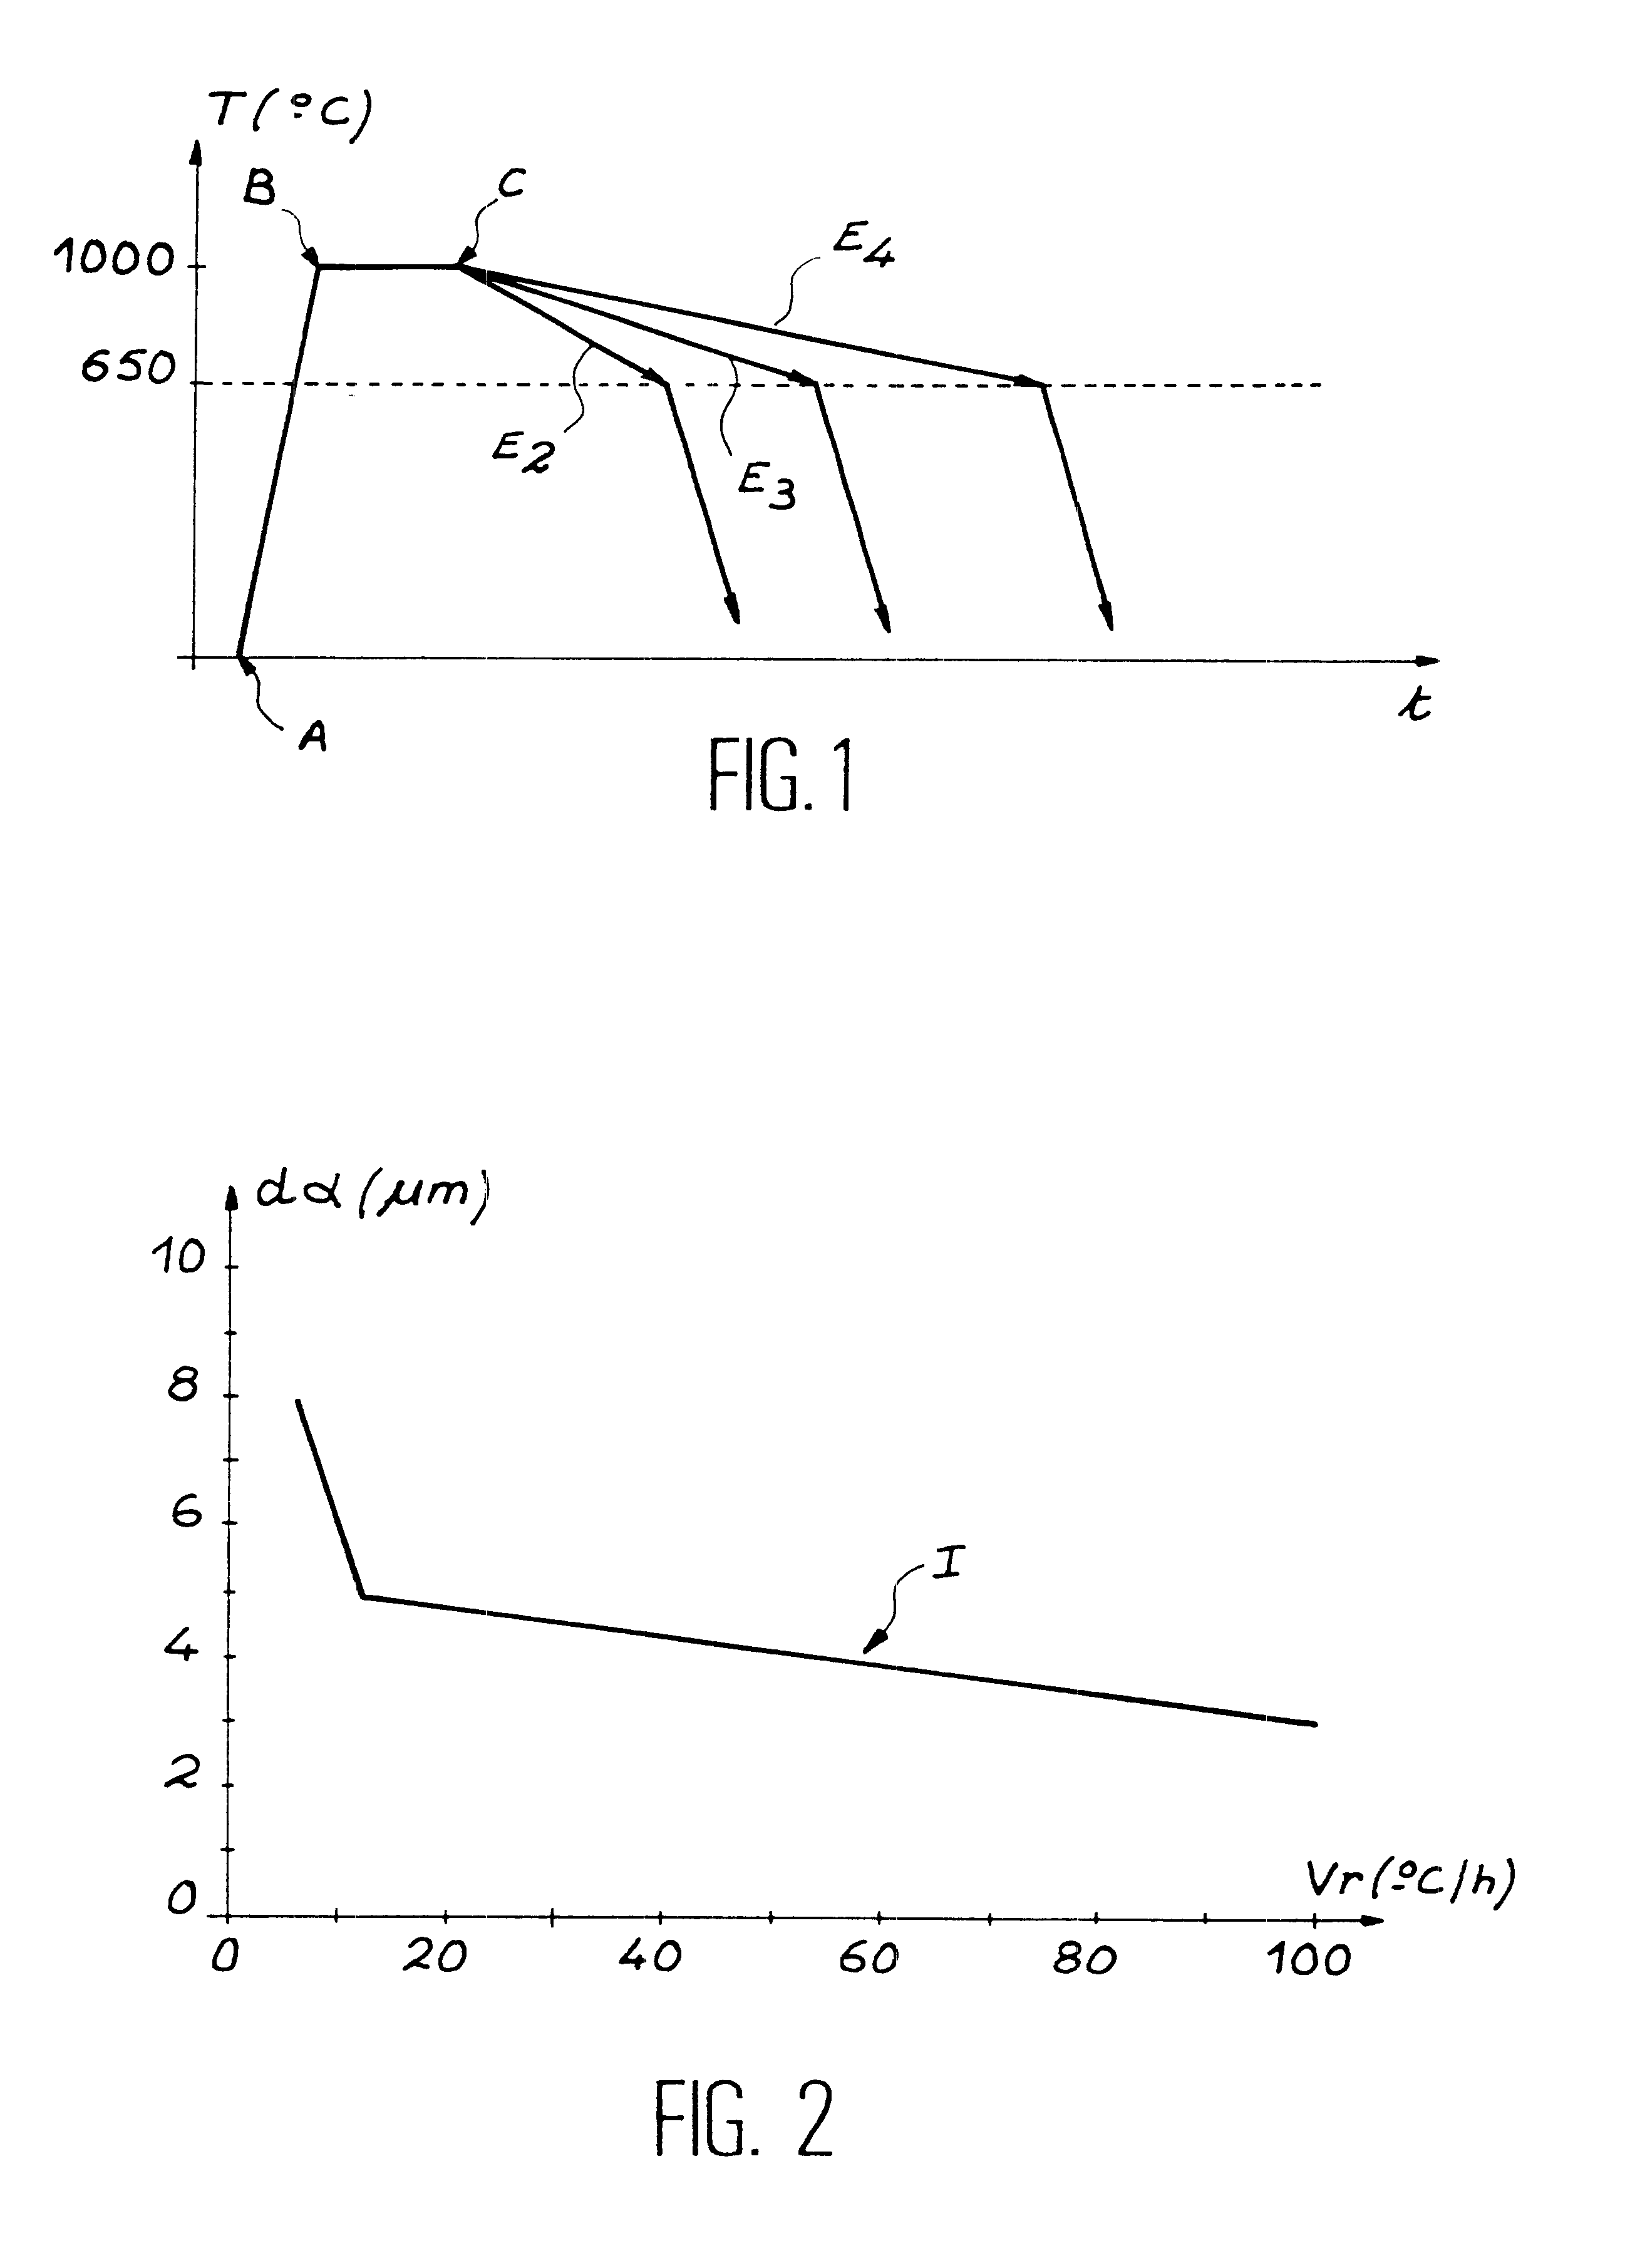 Method of manufacturing a ferritic-martensitic, oxide dispersion strengthened alloy